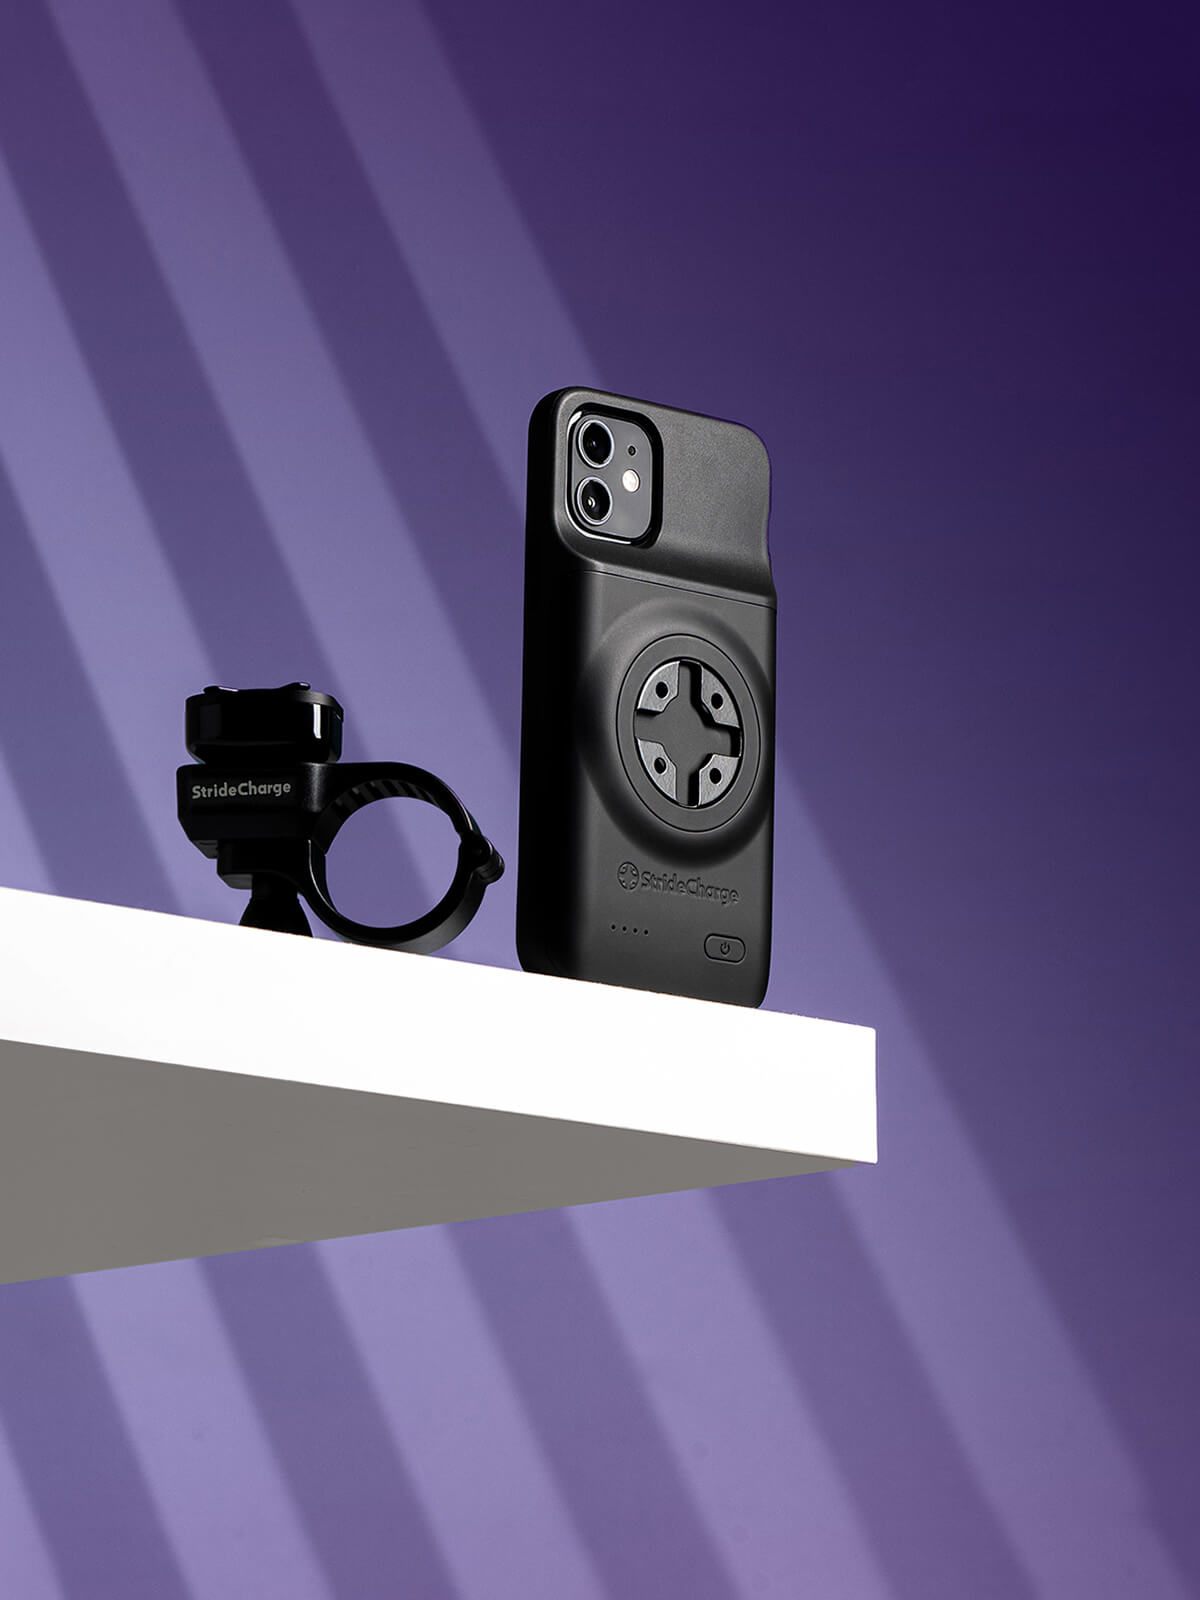 StrideCharge Case and Mount displayed on white ledge with purple background